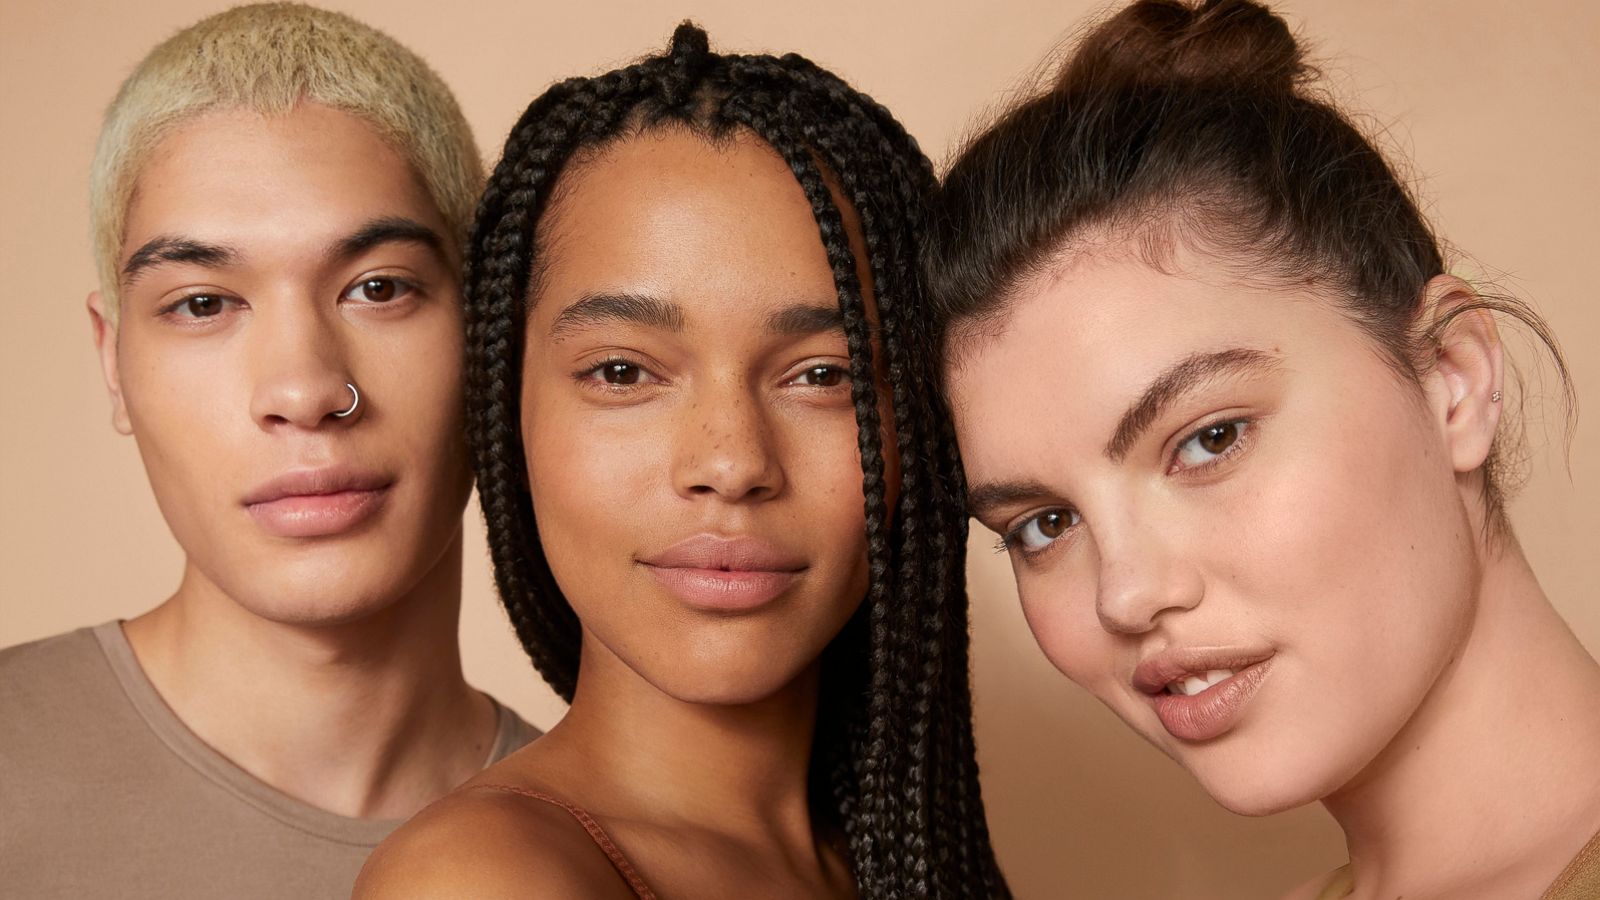 Gender-neutral beauty goes mainstream, here's what you need to